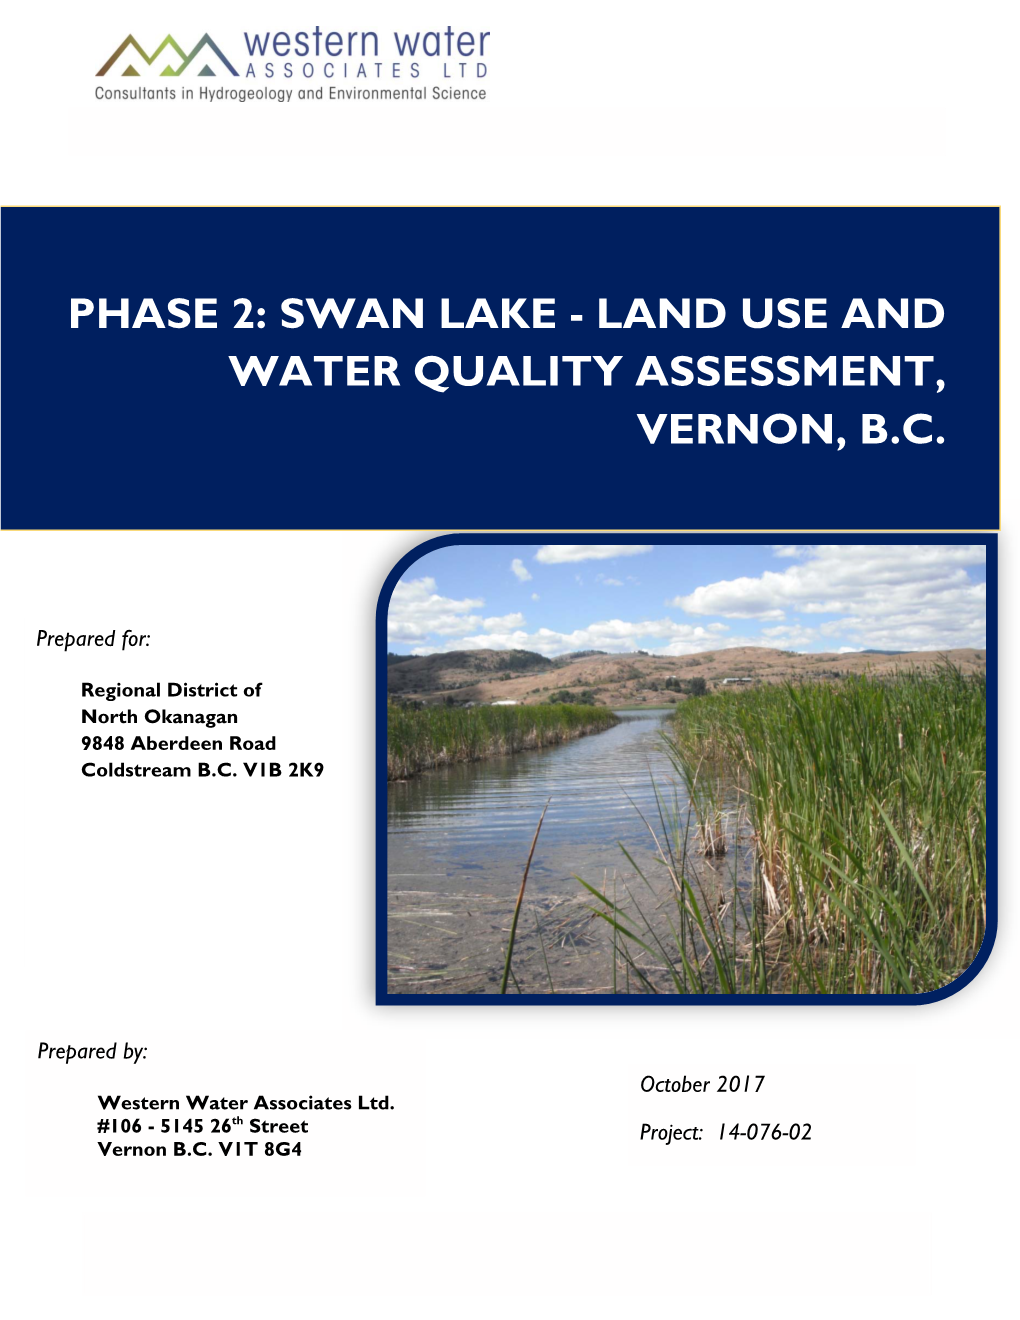 Phase 2: Swan Lake - Land Use and Water Quality Assessment, Vernon, B.C